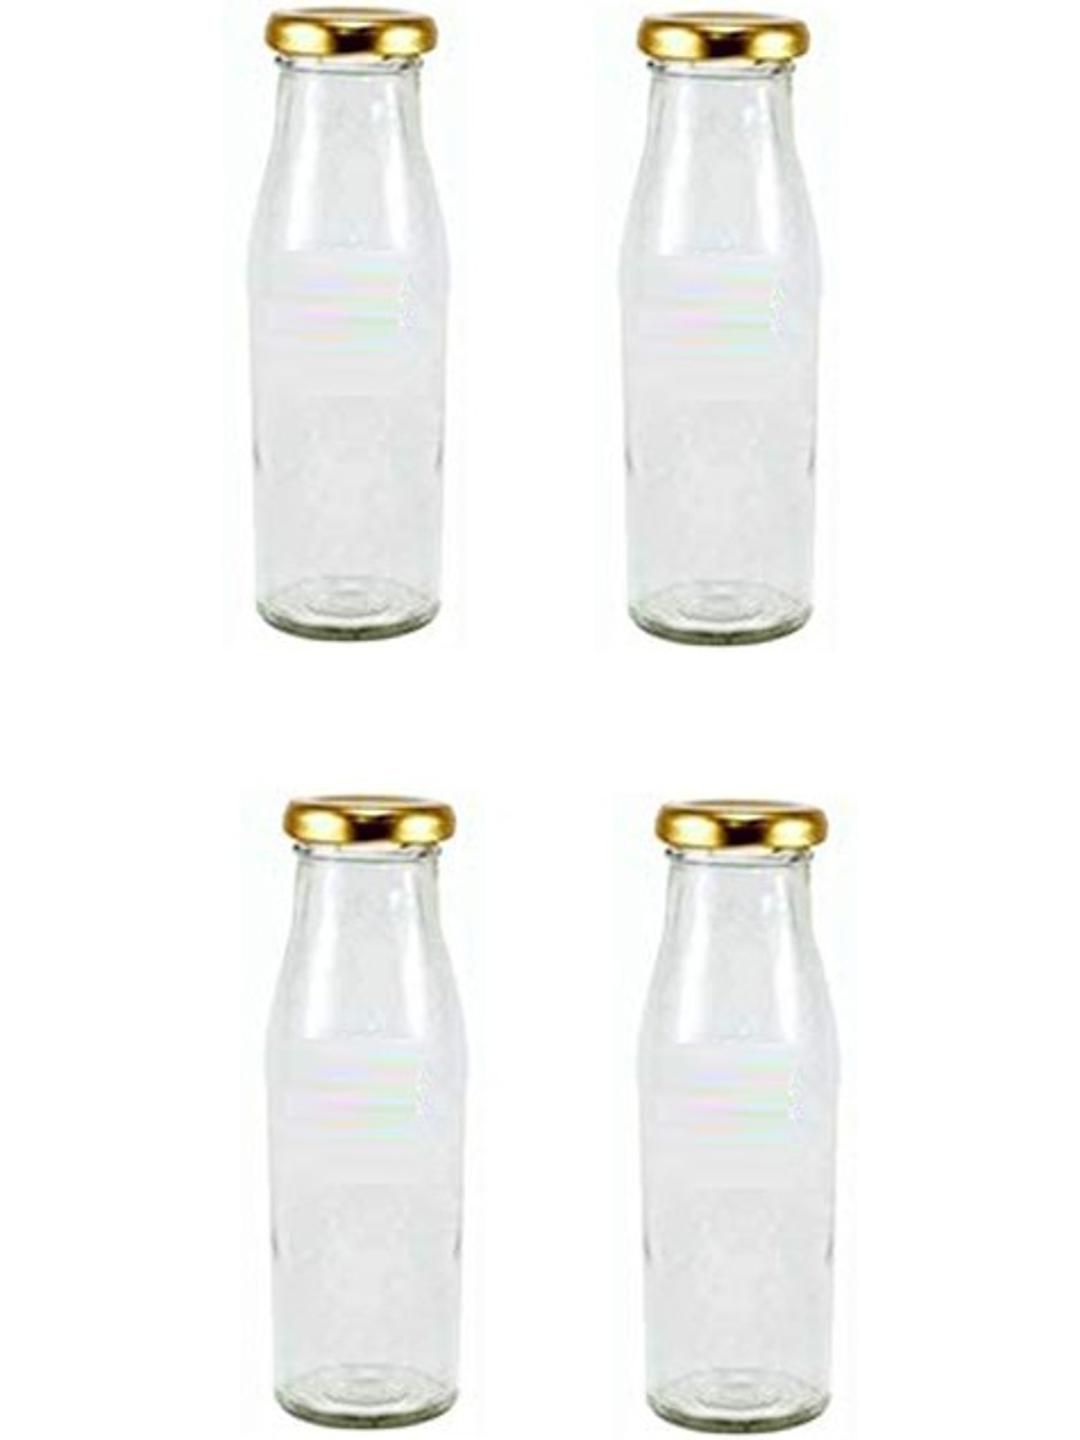     			AFAST Multipurpose Bottle Glass Transparent Utility Container ( Set of 4 )